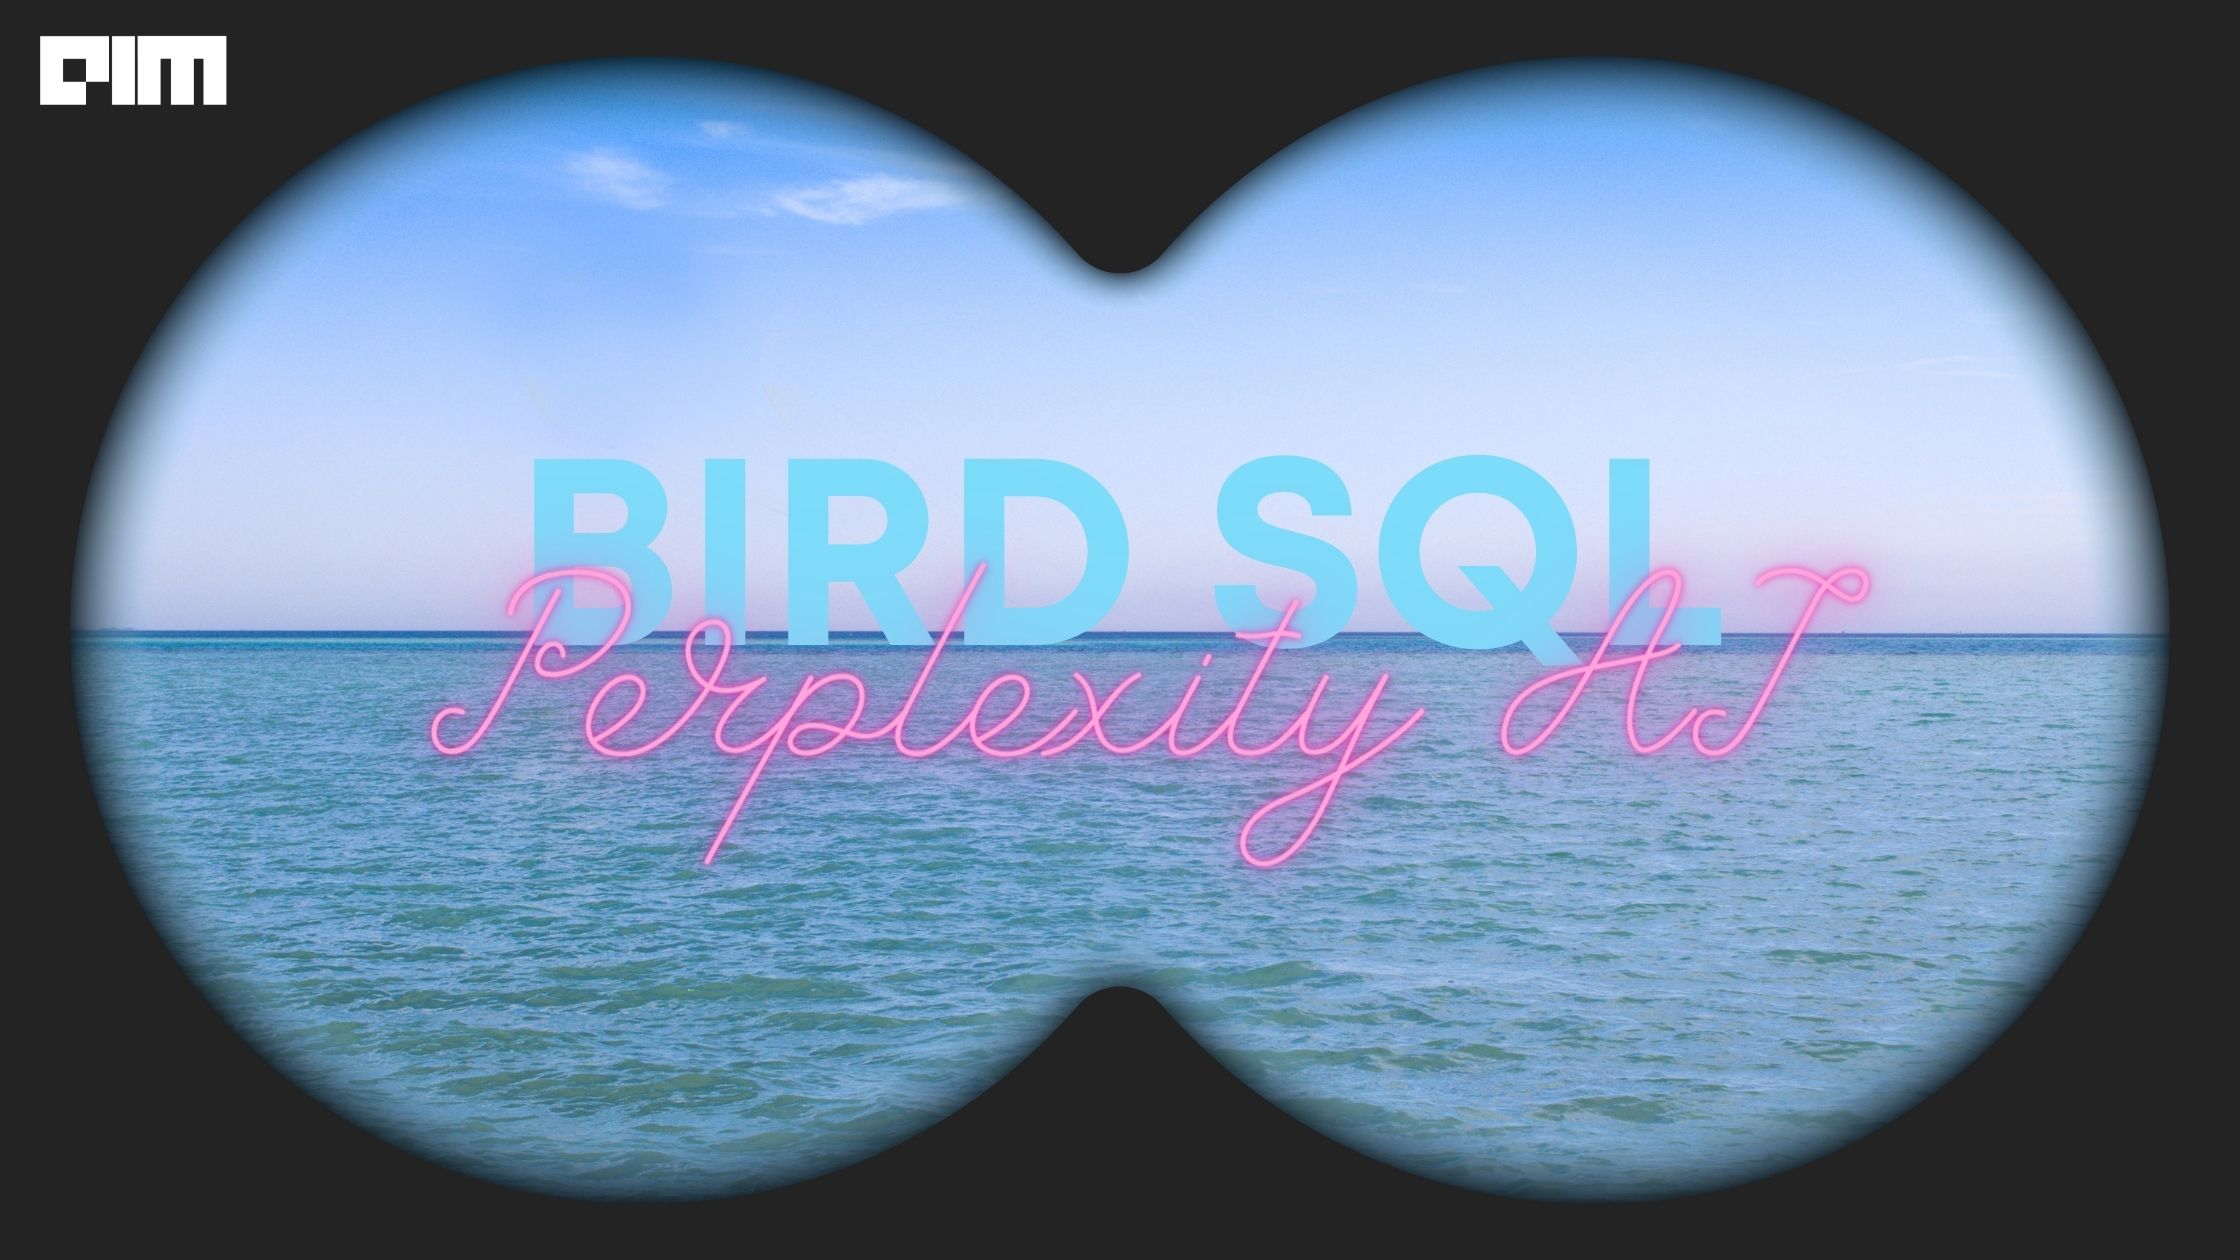 Perplexity AI Improves Twitter Search with BirdSQL